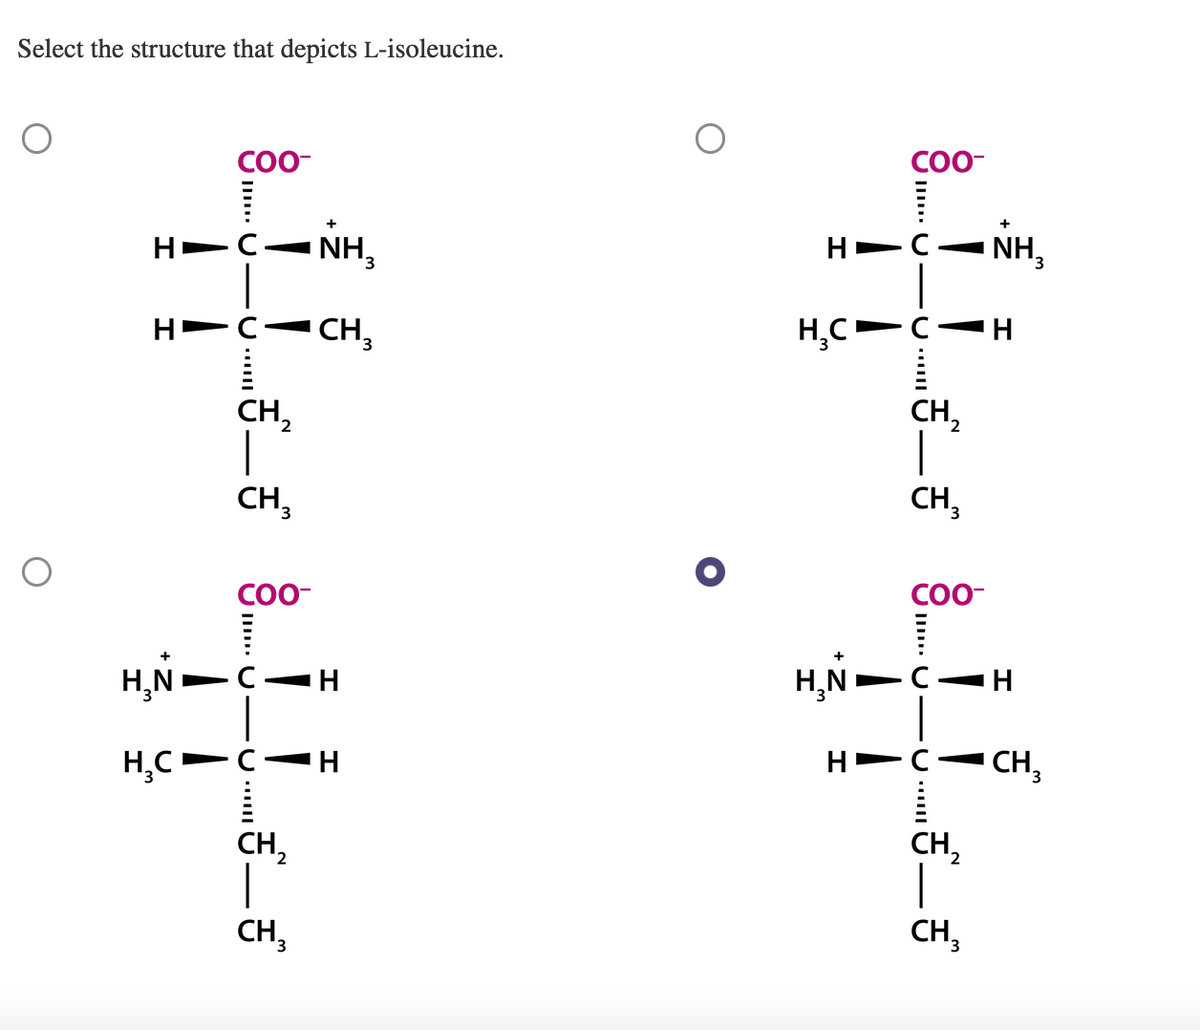 Select the structure that depicts L-isoleucine.
Н
HCẢNH,
H
COO-
H₂C
C
U III
CH₂
CH₂
COO-
H₂NIC H
CH3
CH,
CH₂
H
H➡
COO-
CCC
H₂C C
-
H
CH ₂
CH₂
COO-
H₂N-C-H
U
с
+
NH₂
CH₂
CH3
I
CH 3